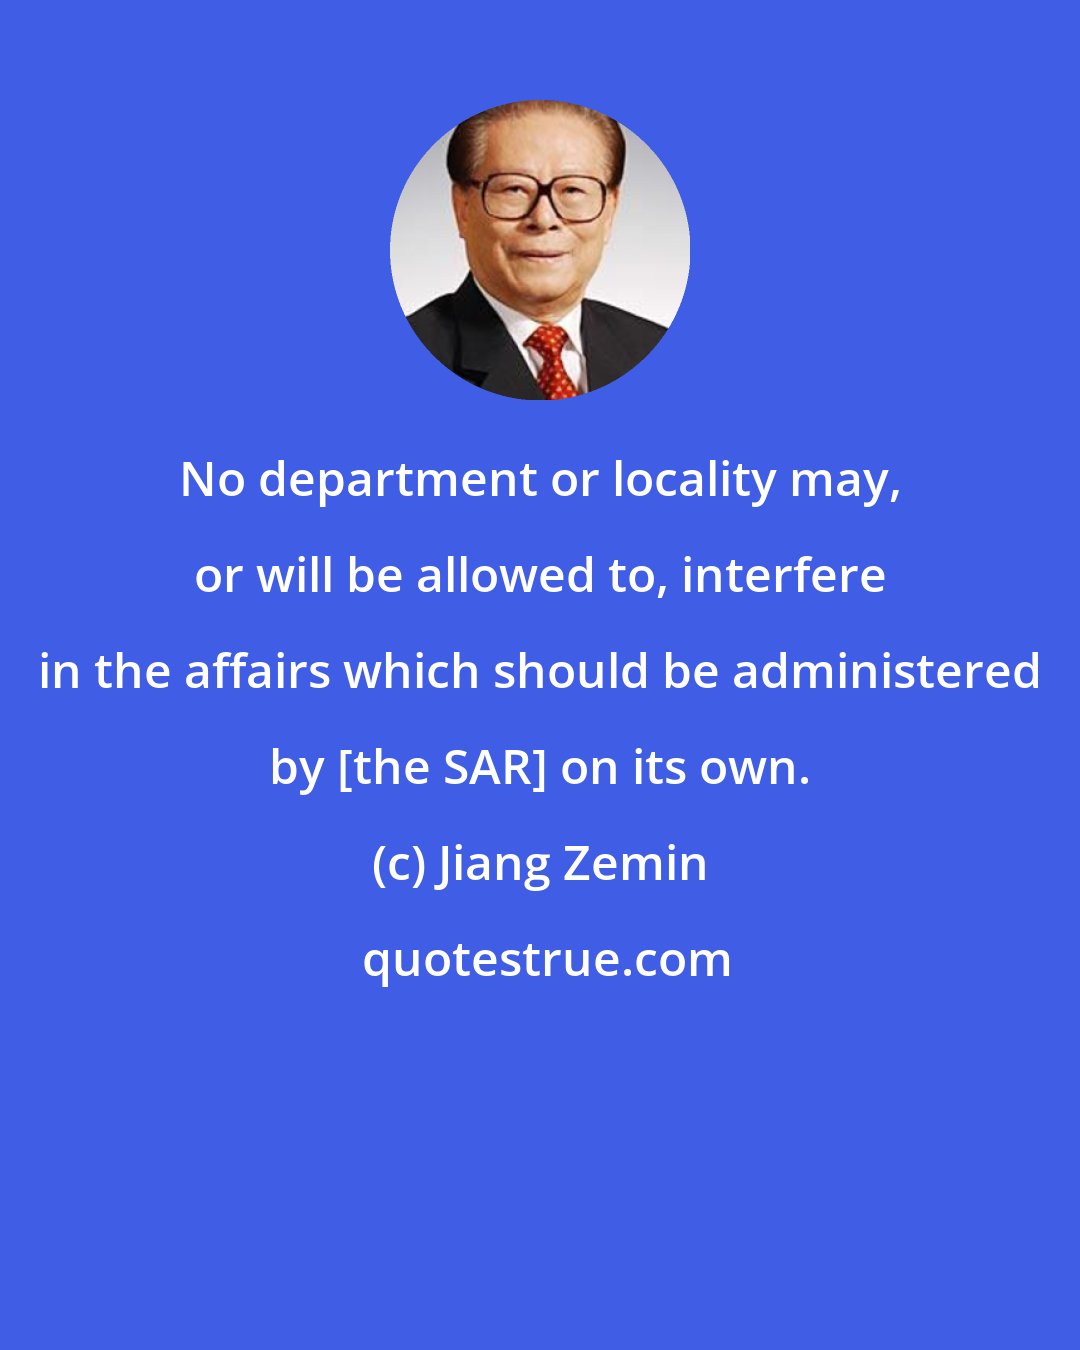 Jiang Zemin: No department or locality may, or will be allowed to, interfere in the affairs which should be administered by [the SAR] on its own.